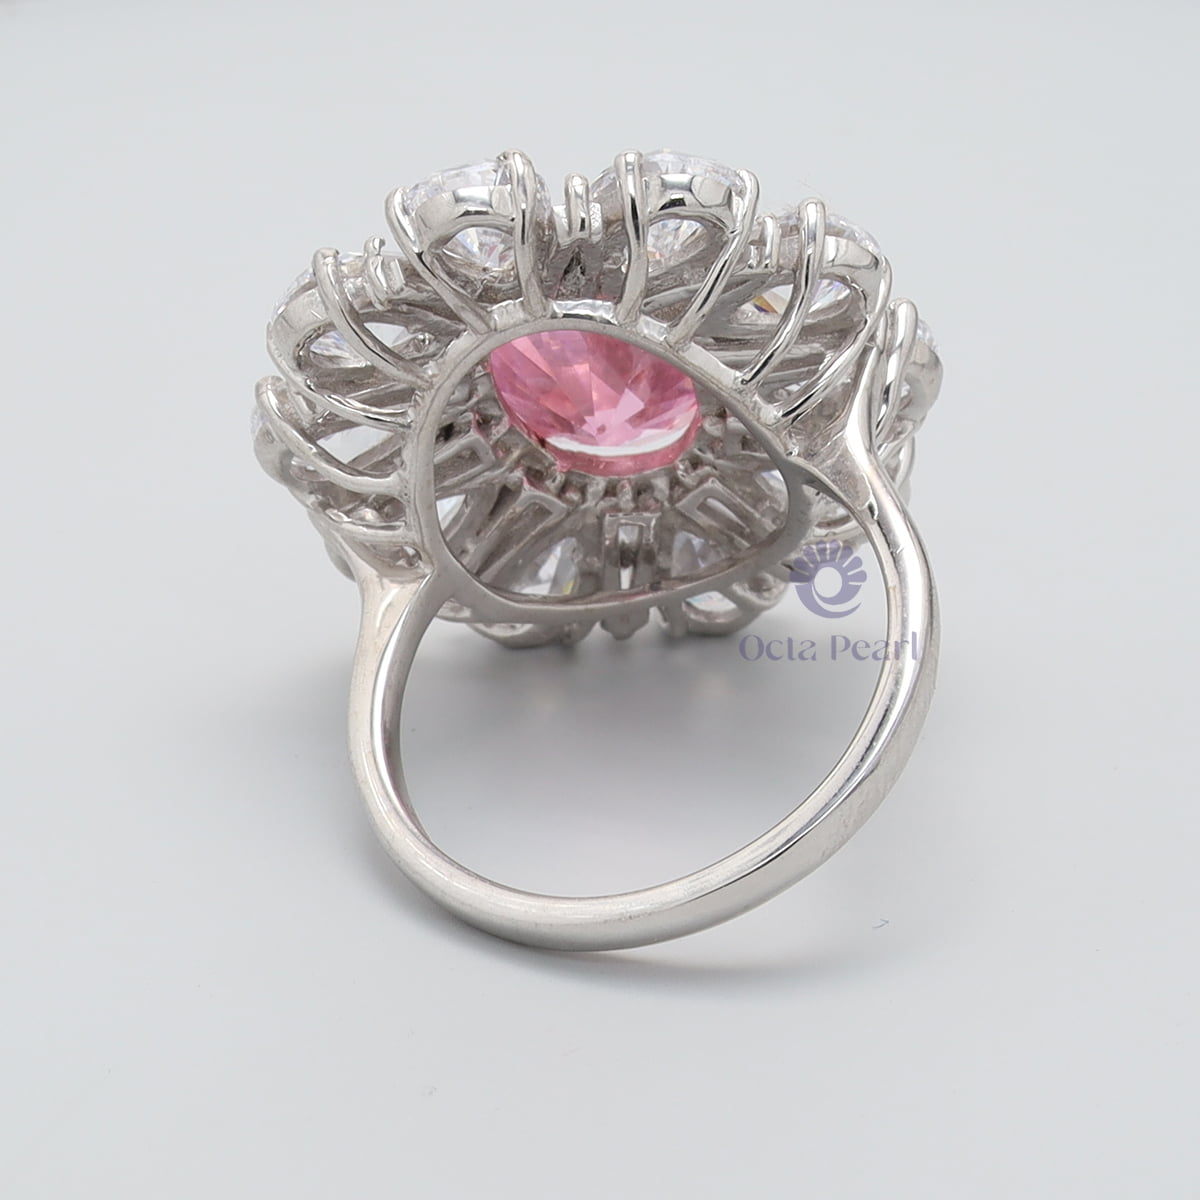 Baby Pink Oval With White Pear Cut CZ Stone Floral Inspire Cocktail Ring For Mother's Day Gift